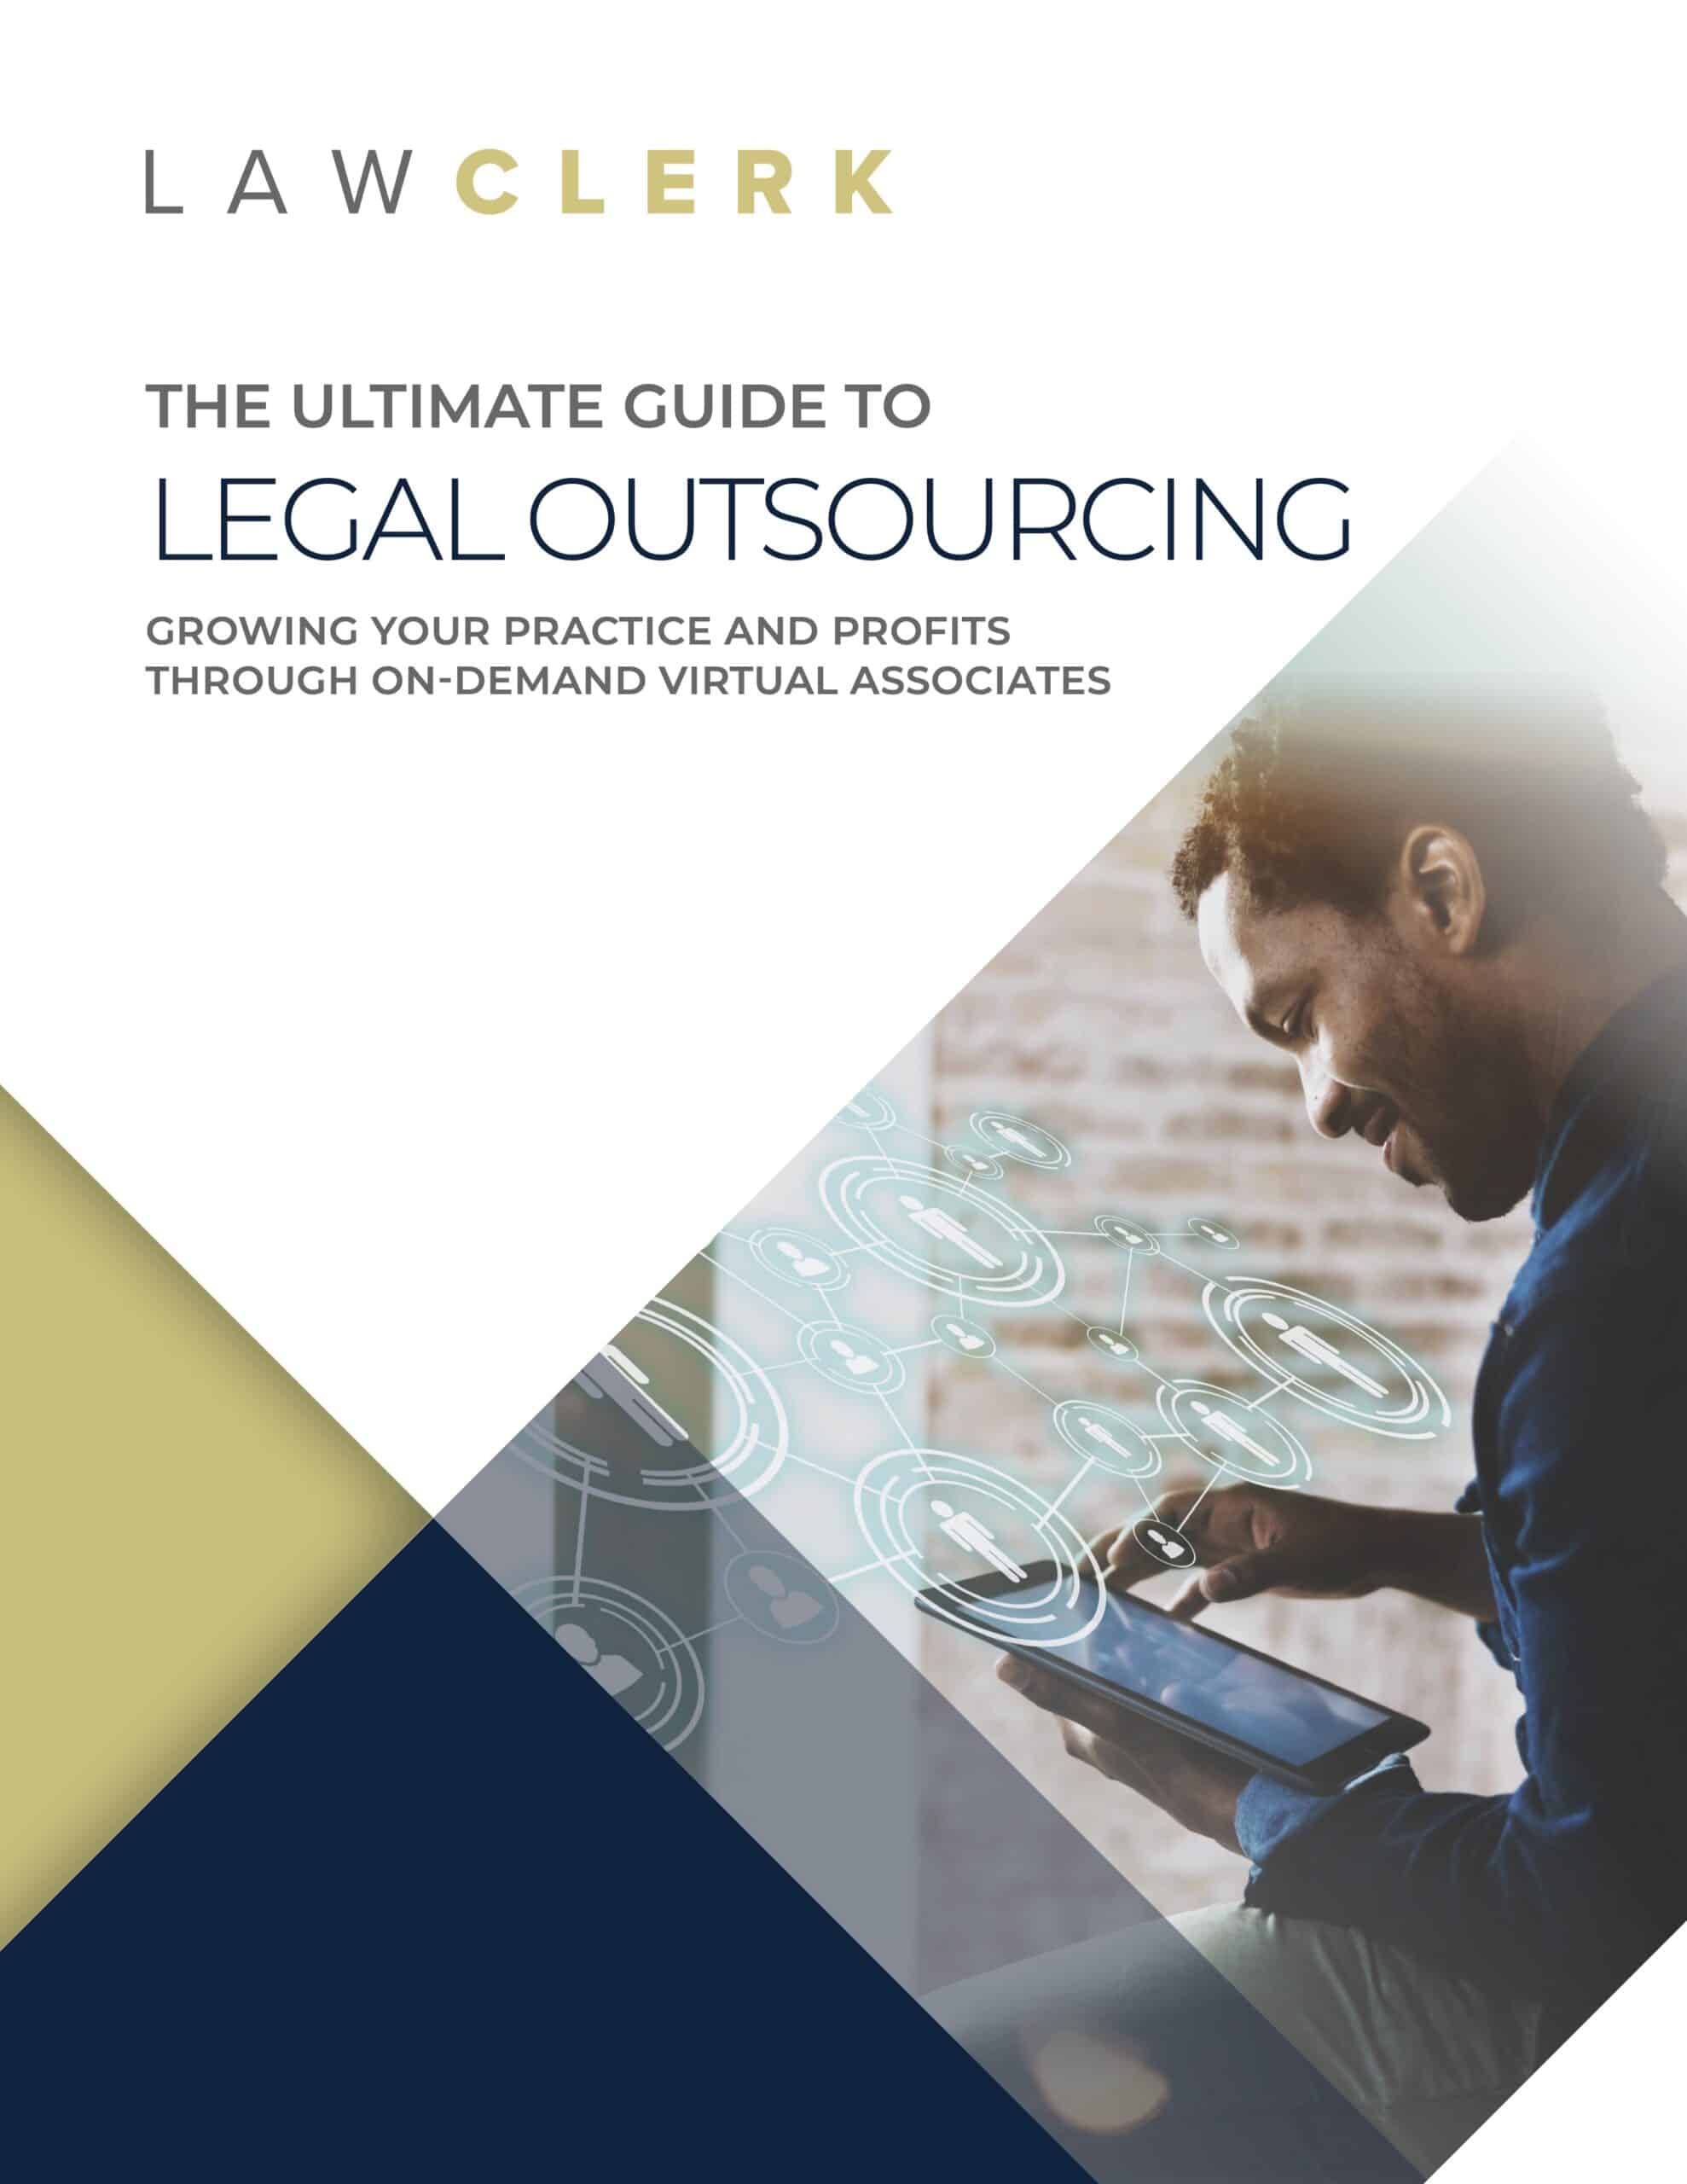 The Ultimate Guide to Legal Outsourcing